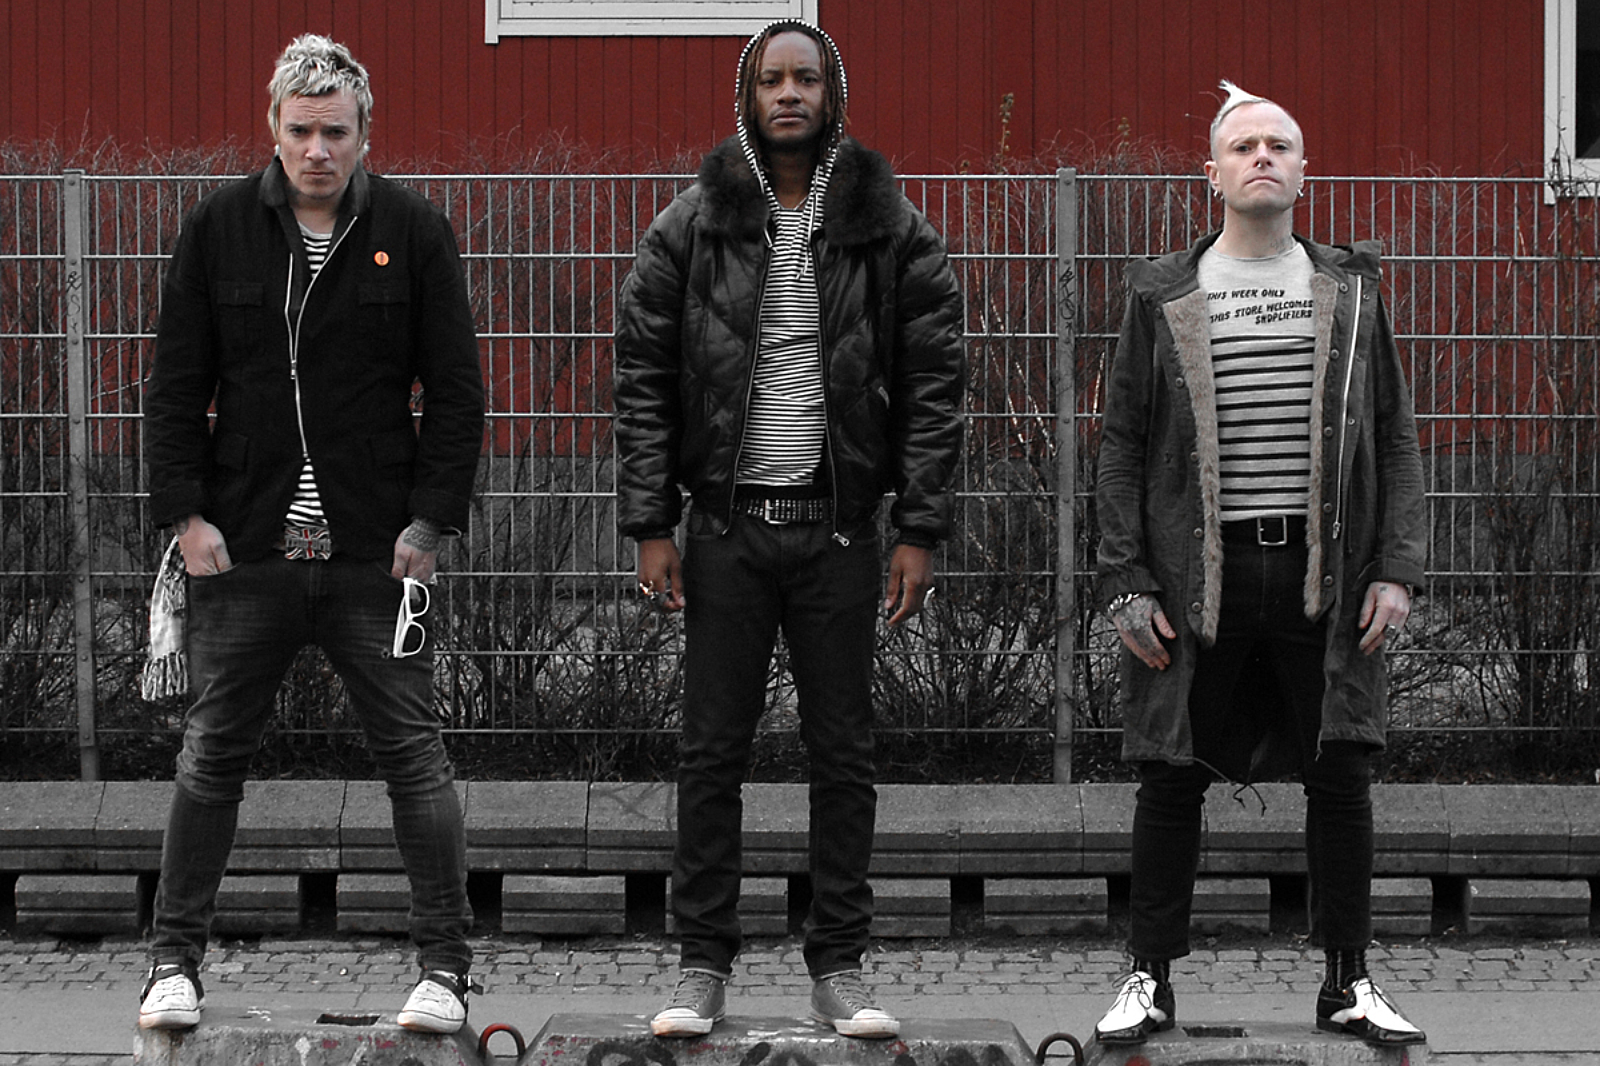 The Prodigy share ‘Get Your Fight On’ video